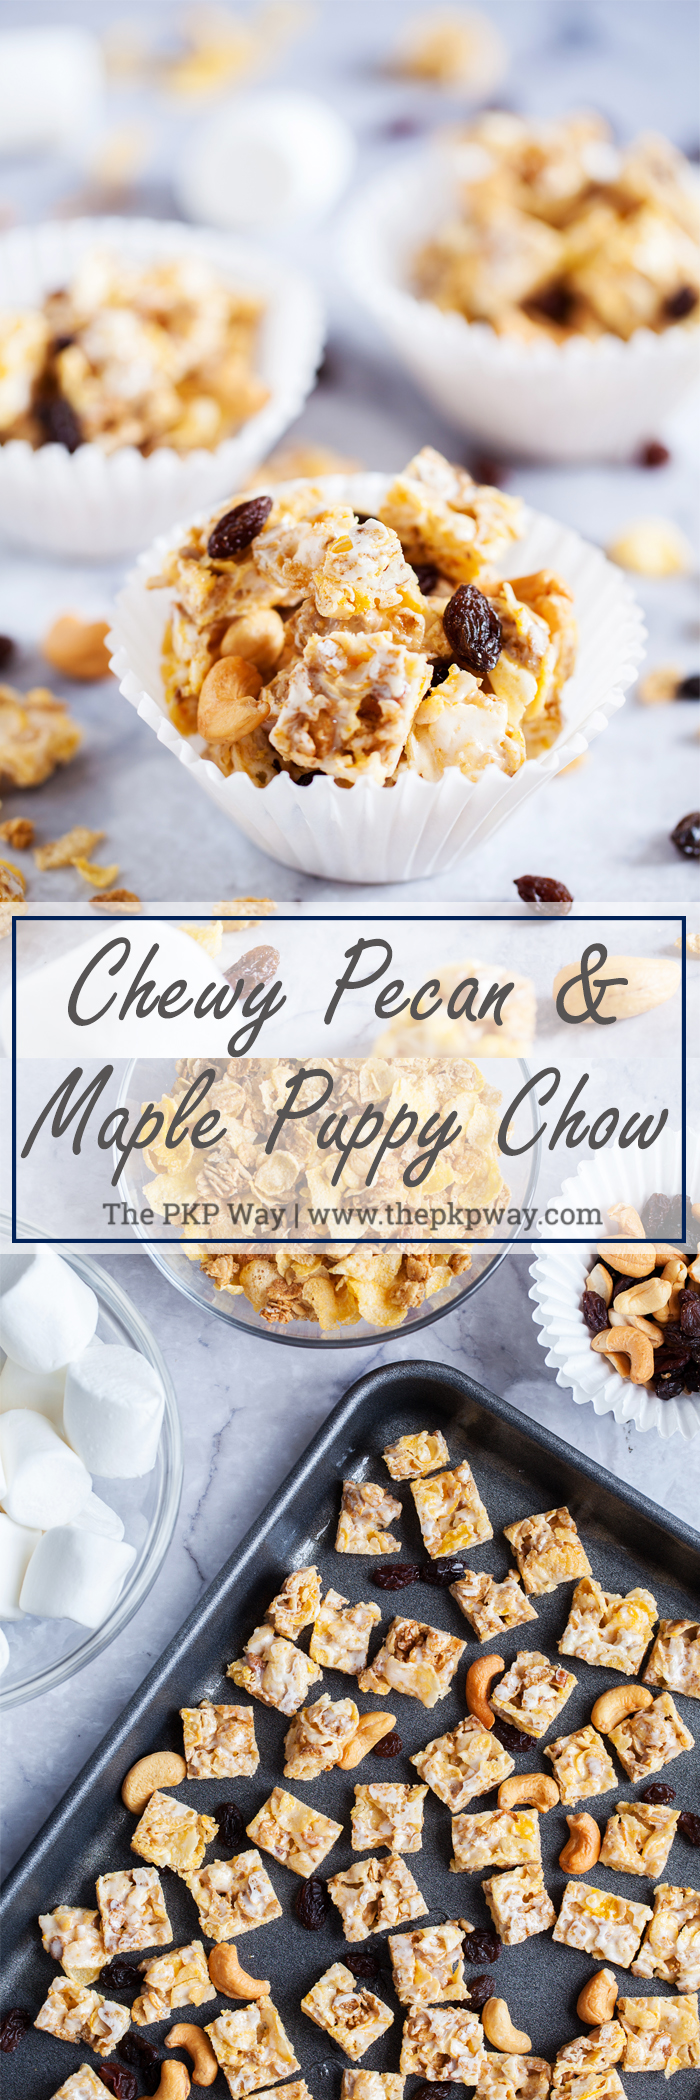 Chewy Pecan & Maple Puppy Chow with soft and chewy raisins and crunchy cashews is a fun and non-traditional way to enjoy cereal.